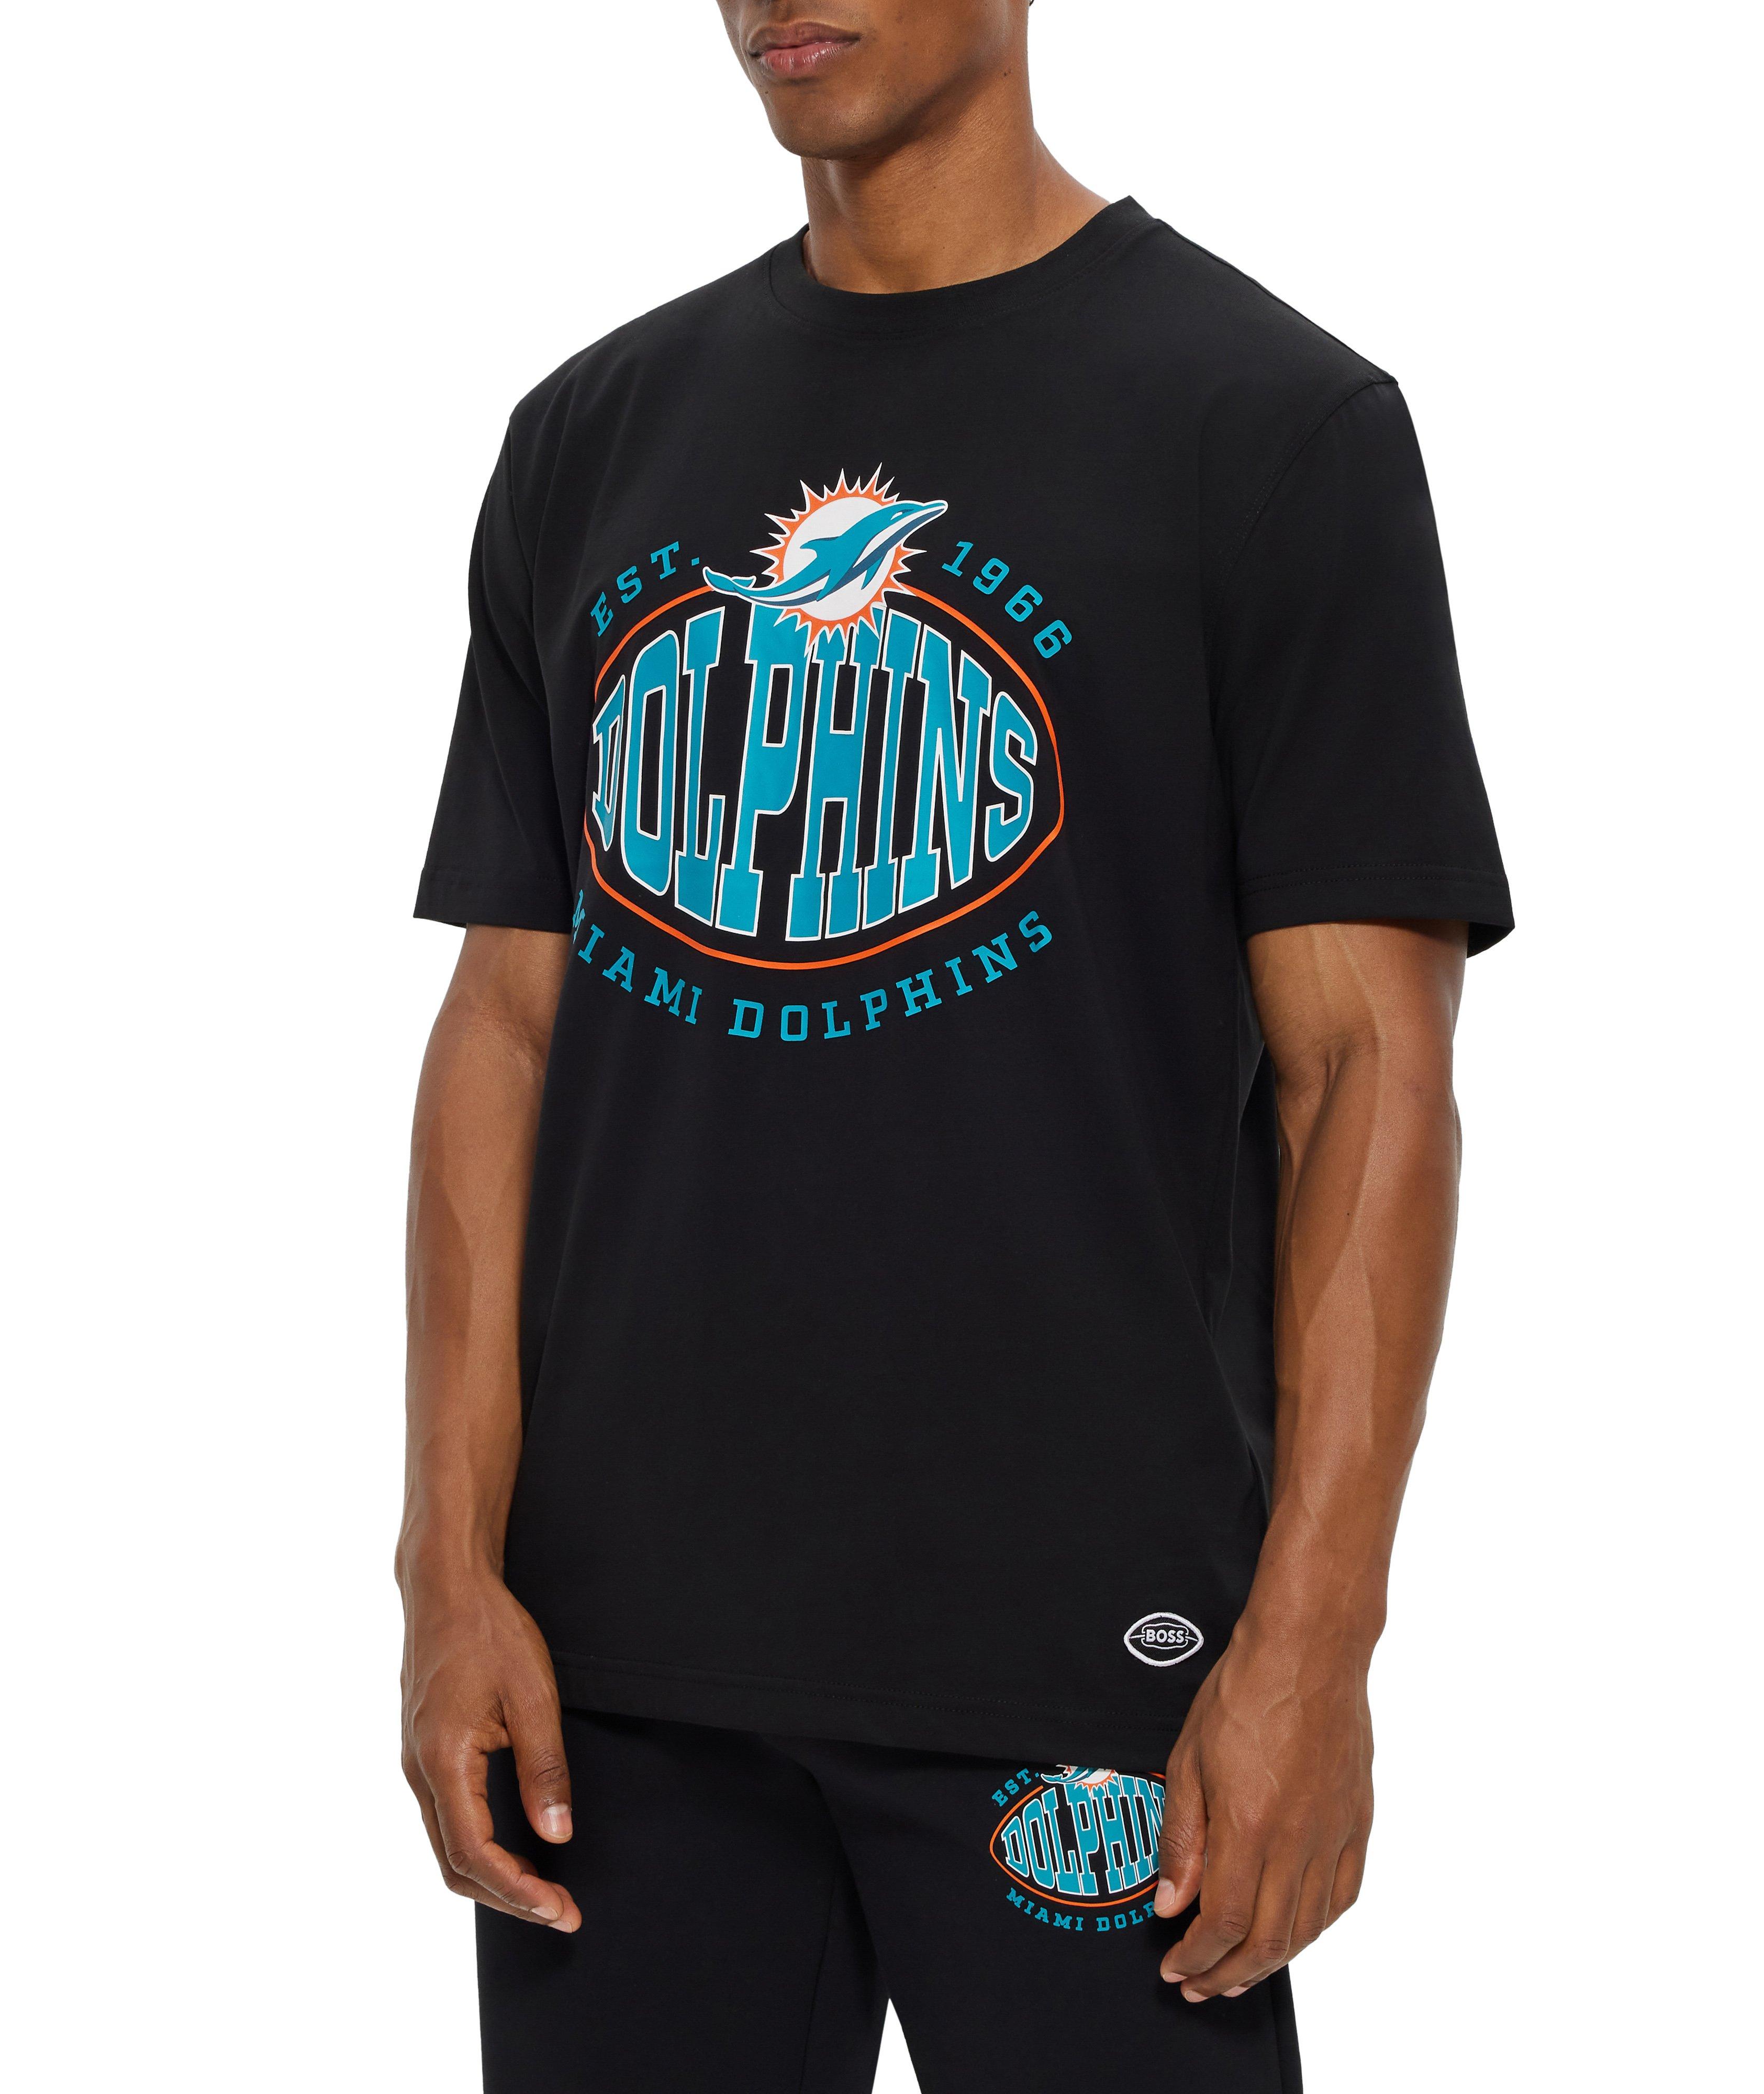 NFL Collection Miami Dolphins T-Shirt image 1